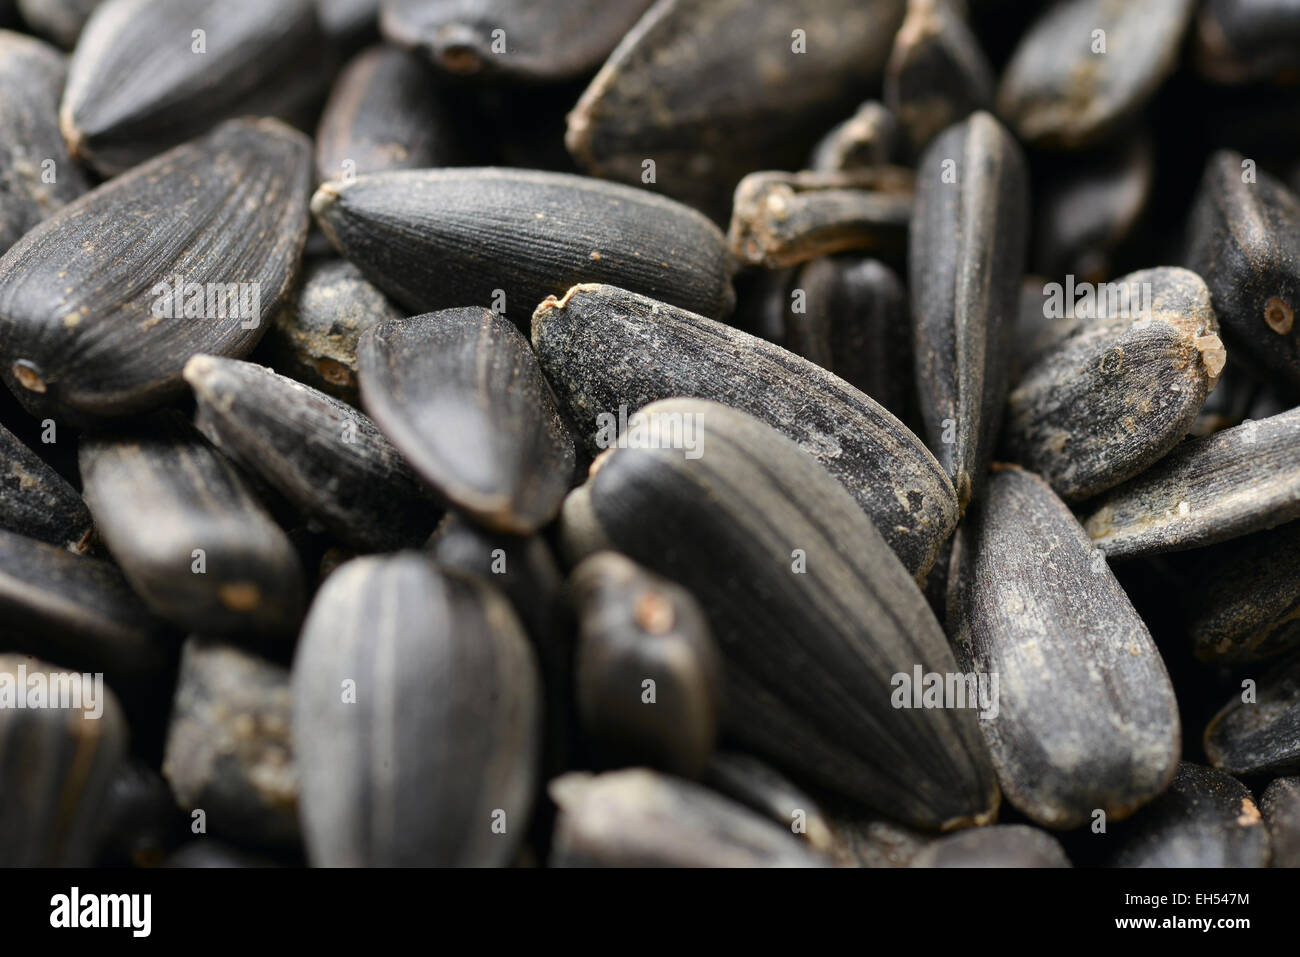 Sunflower seeds, for backgrounds or textures. Stock Photo